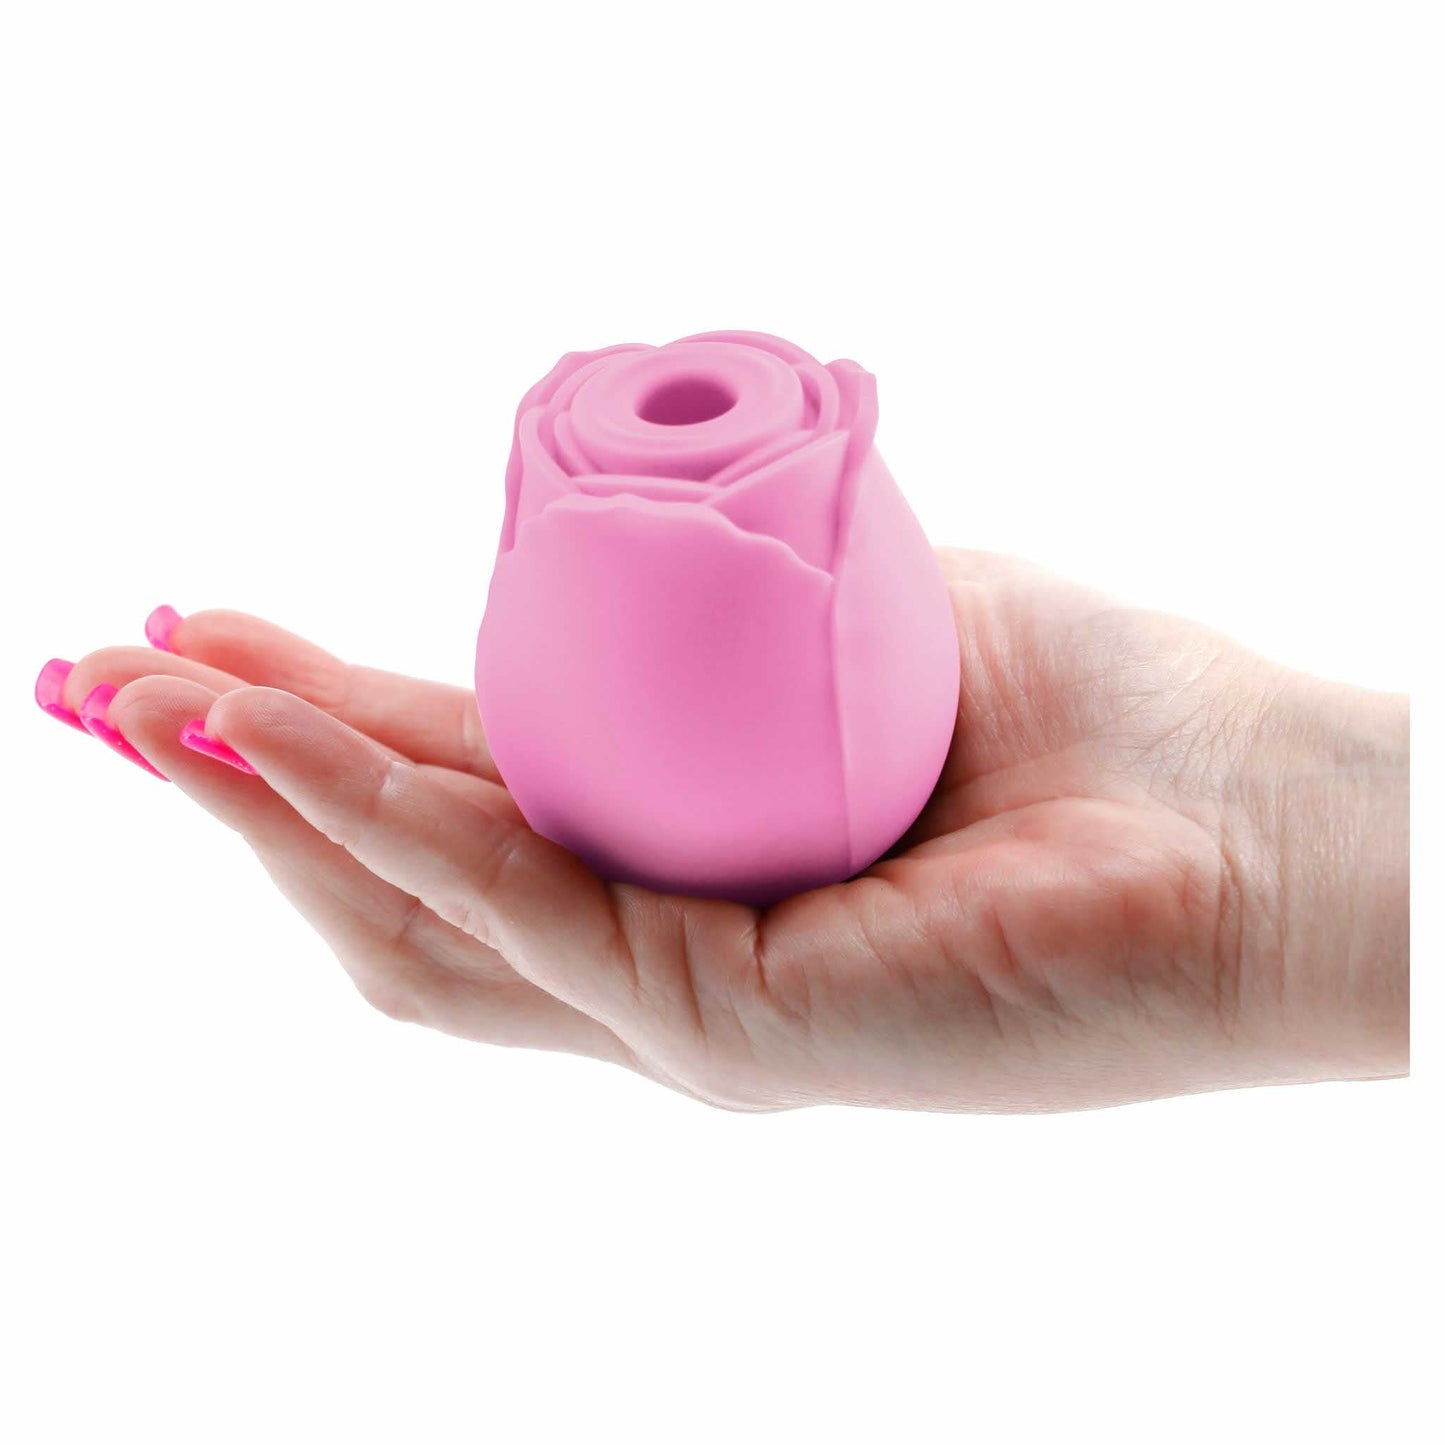 person holding the ns novelties inya the rose vibrating air pulsator pink